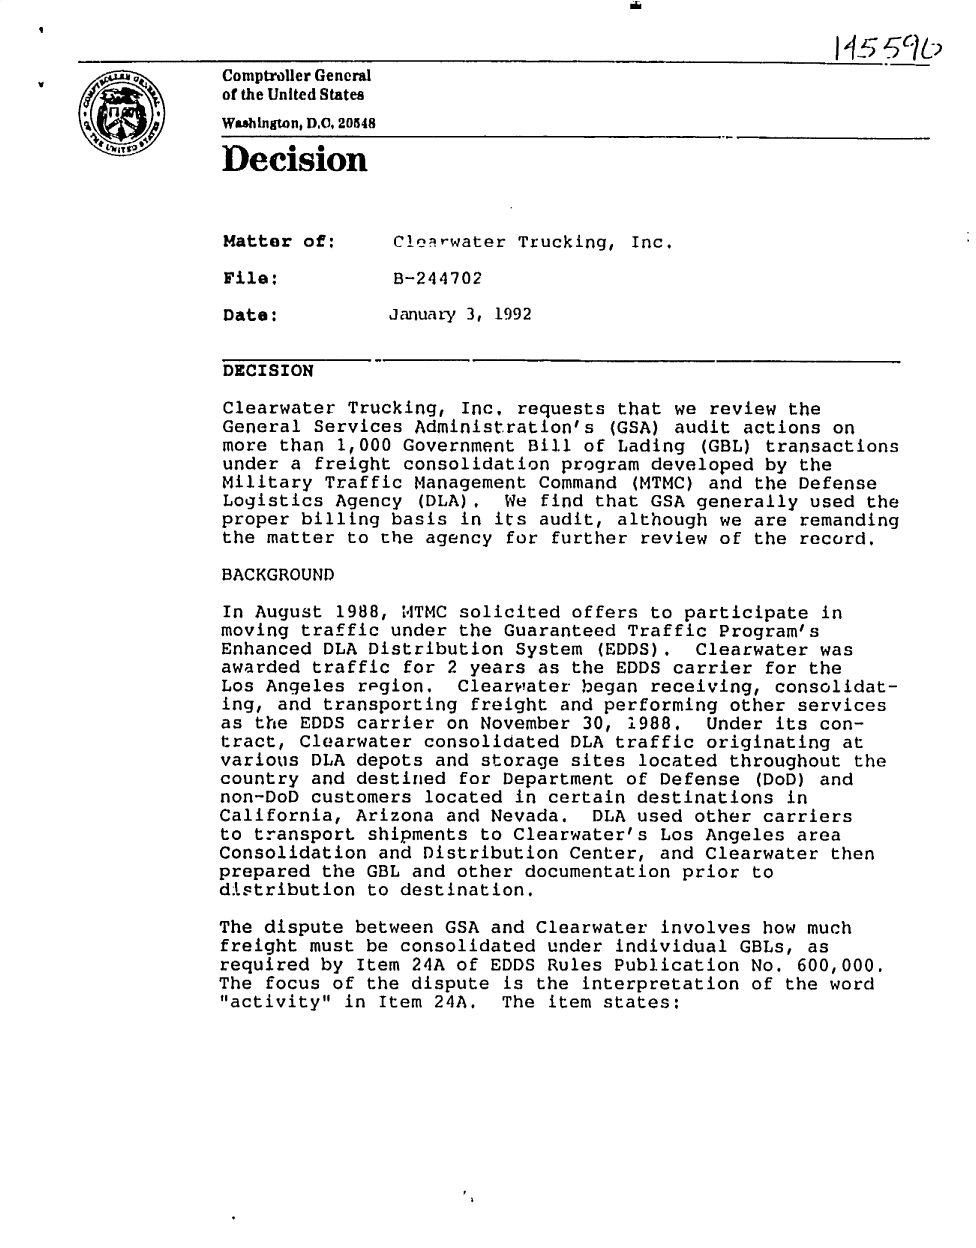 handle is hein.gao/gaobadnzn0001 and id is 1 raw text is: 


Comptroller General
of the United States
Wshngton, DC, 20548
Decision




Matter of:      Clerrwater Trucking, Inc.

File:           B-244702

Date:           January 3, 1992

DECISION

Clearwater Trucking, Inc. requests that we review the
General Services Administration's (GSA) audit actions on
more than 1,000 Government Bill of Lading (GBL) transactions
under a freight consolidation program developed by the
Military Traffic Management Command (MTMC) and the Defense
Logistics Agency (DLA), We find that GSA generally used the
proper billing basis in its audit, although we are remanding
the matter to the agency for further review of the record.

BACKGROUND

In August 1988, WTMC solicited offers to participate in
moving traffic under the Guaranteed Traffic Program's
Enhanced DLA Distribution System (EDDS).    Clearwater was
awarded traffic for 2 years as the EDDS carrier for the
Los Angeles region.   Clearwater began receiving, consolidat-
ing, and transporting freight and performing other services
as the EDDS carrier on November 30, 1988. Under its con-
tract, Clearwater consolidated DLA traffic originating at
various DLA depots and storage sites located throughout the
country and destined for Department of Defense (DoD) and
non-DoD customers located in certain destinations in
California, Arizona and Nevada. DLA used other carriers
to transport shipments to Clearwater's Los Angeles area
Consolidation and Distribution Center, and Clearwater then
prepared the GBL and other documentation prior to
distribution to destination.

The dispute between GSA and Clearwater involves how much
freight must be consolidated under individual GBLs, as
required by Item 24A of EDDS Rules Publication No. 600,000.
The focus of the dispute is the interpretation of the word
activity in Item 24A. The item states:


